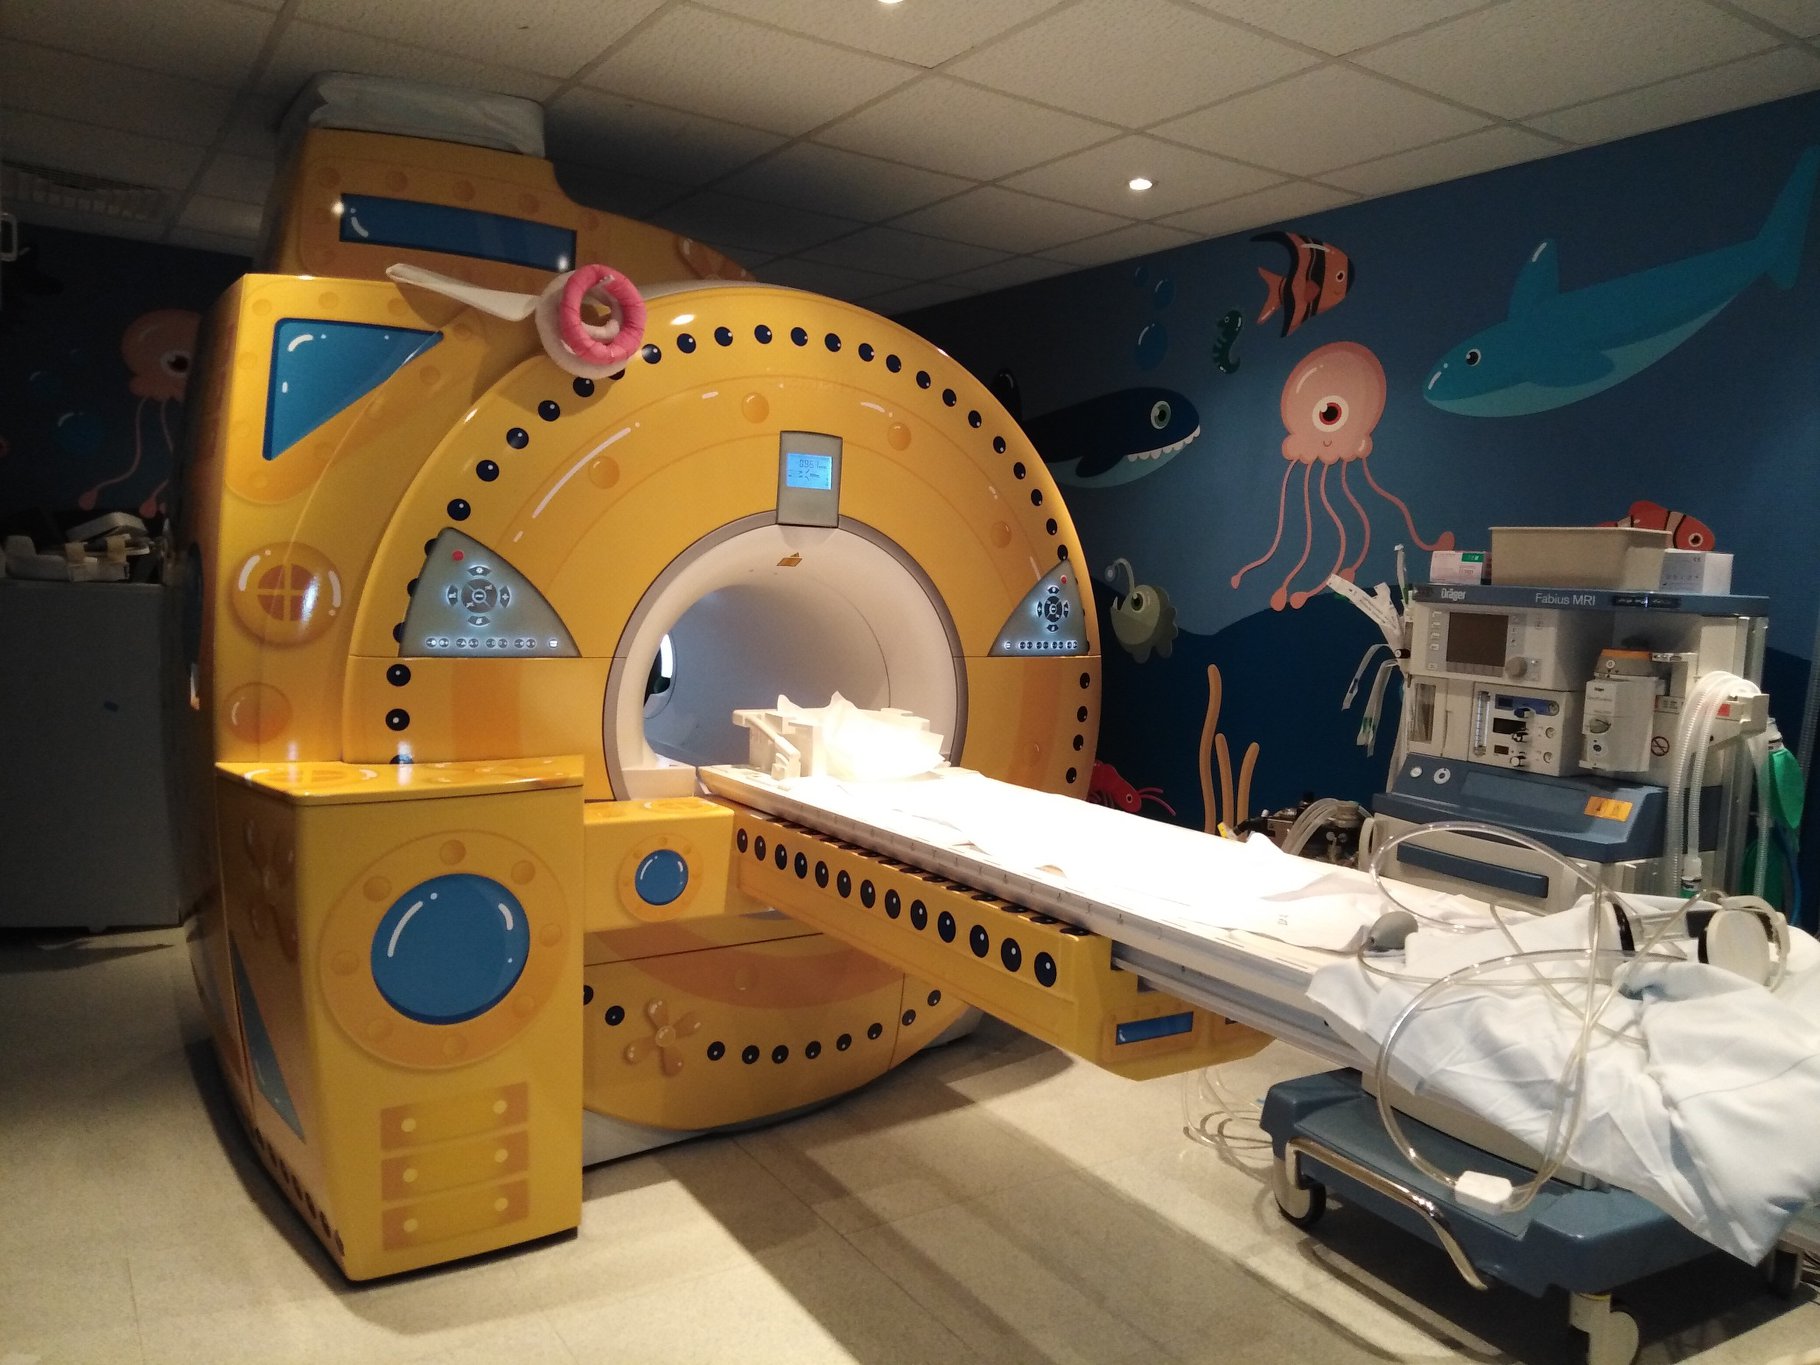 an mri machine decorated to look like a submarine that's inside of a room with walls painted with sea creatures